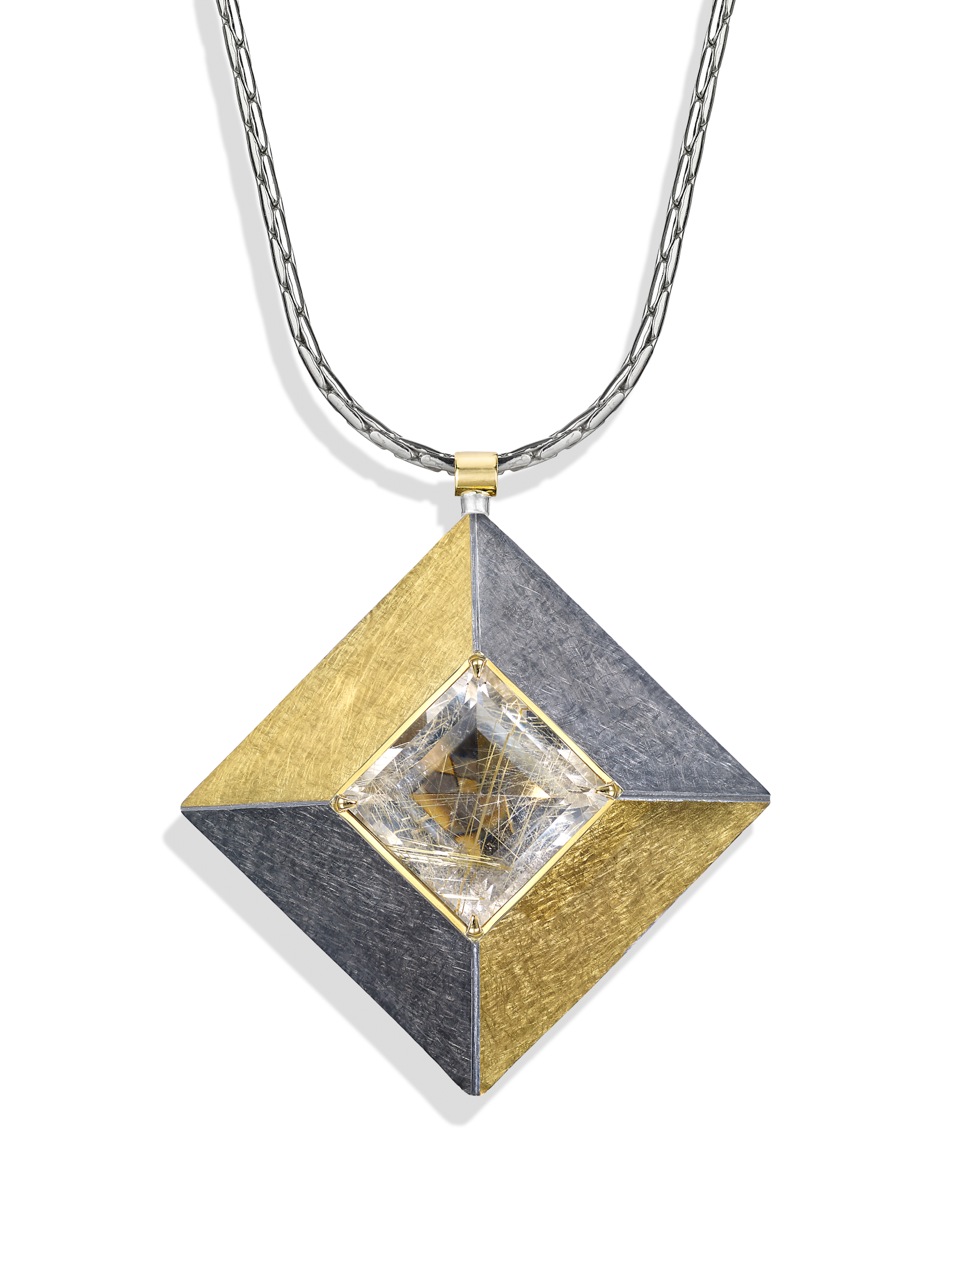 <a href="/node/263">Cardinal Points :  Silver 5.0cm square, scrubbed finish finished in Black Rhodium and gilding,  stone setting 18ct gold, stone Rutilated Quartz . View 5 : face on, Close Up - showing unusual relections in the stone.</a>